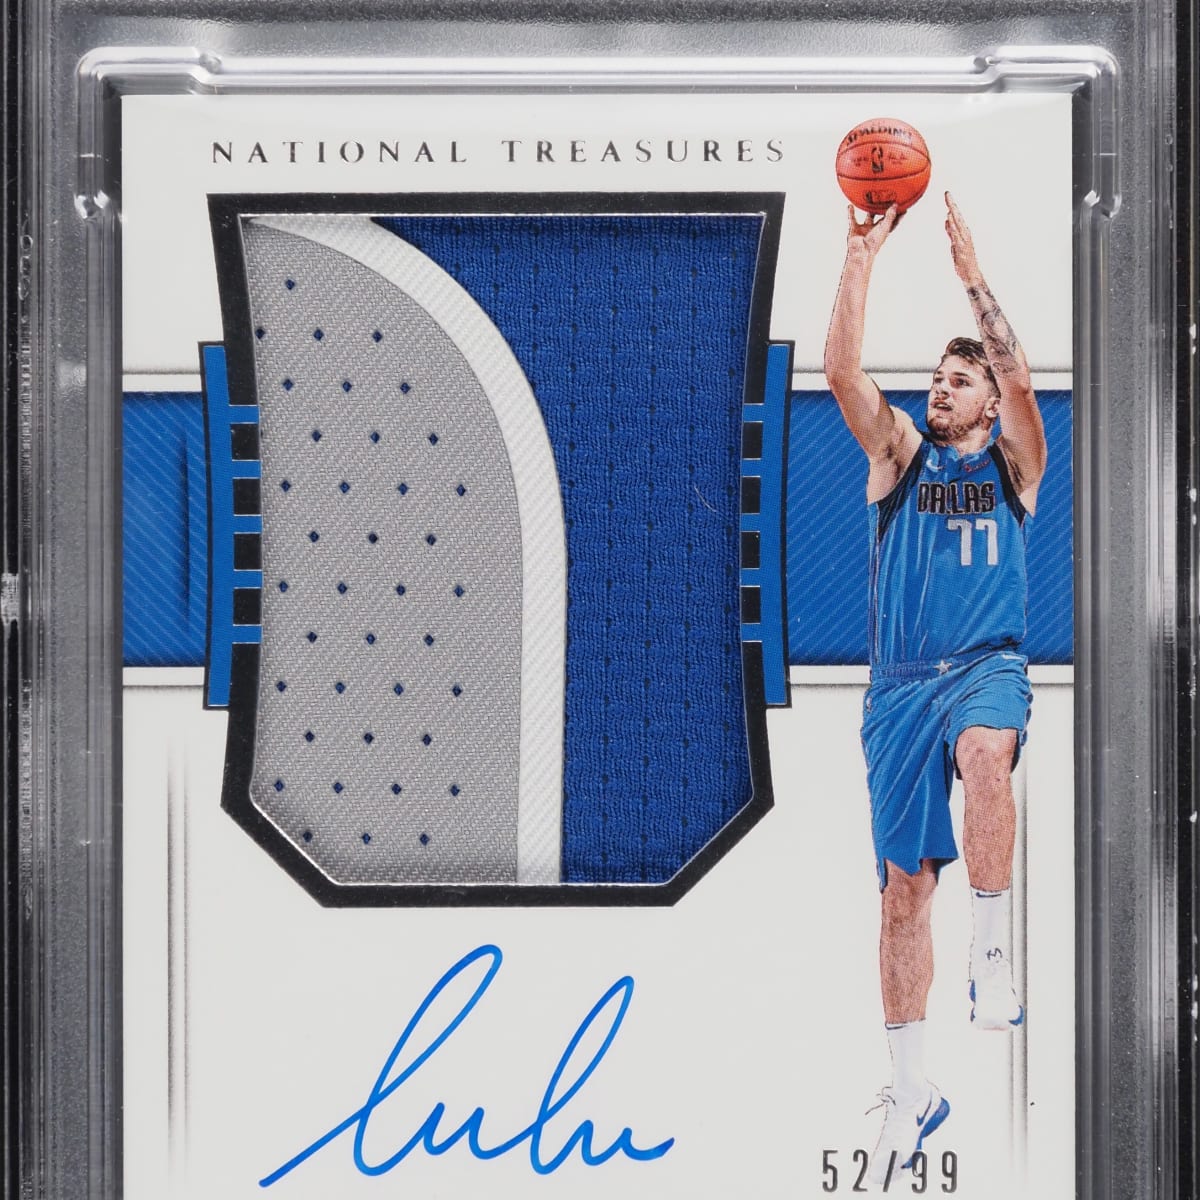 A Luka Doncic' rookie card with a patch of one of his game-worn